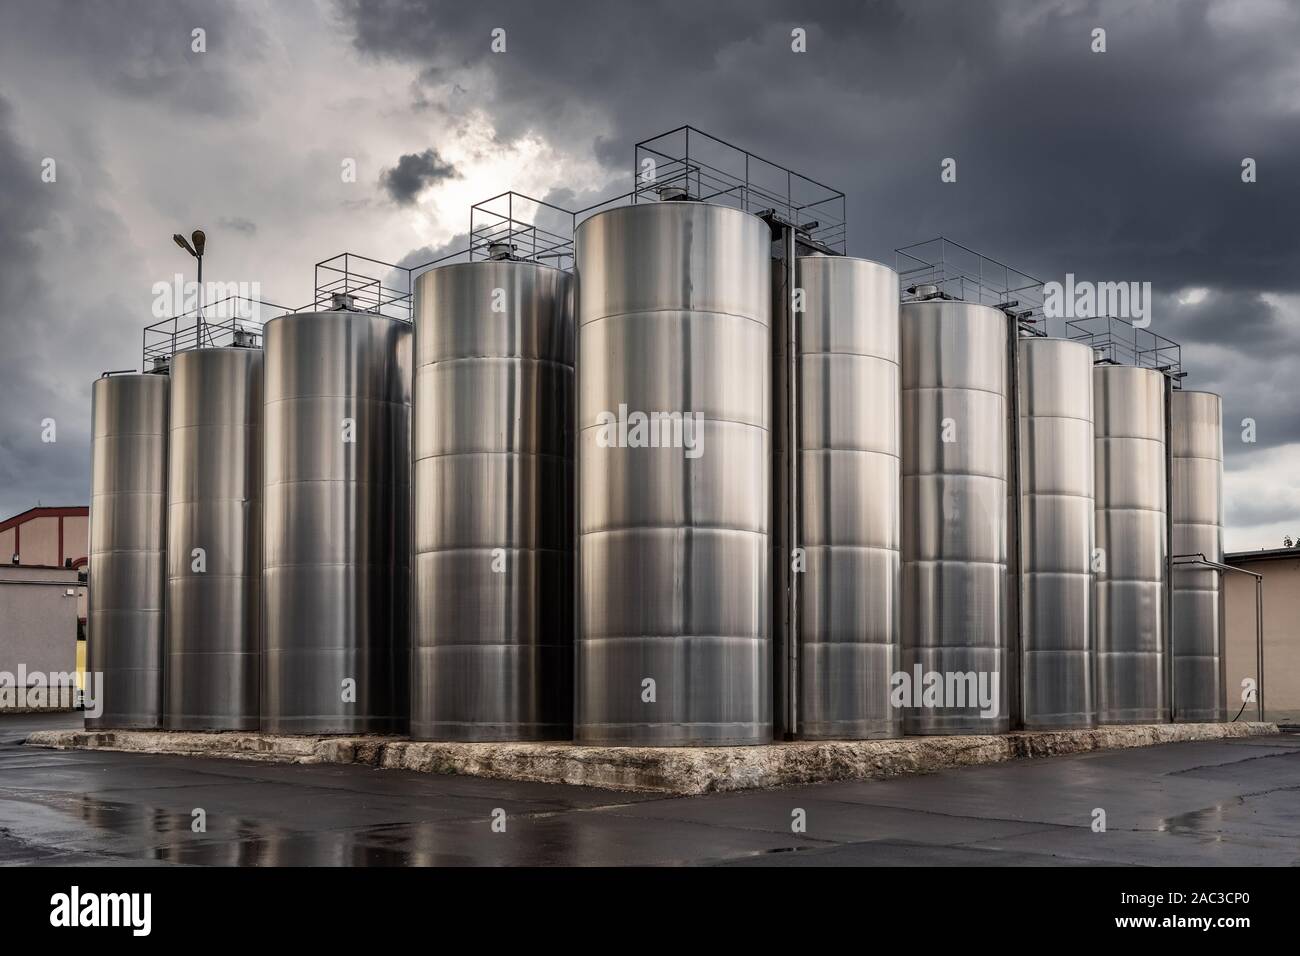 Stainless steel wine barrels in the winery Stock Photo